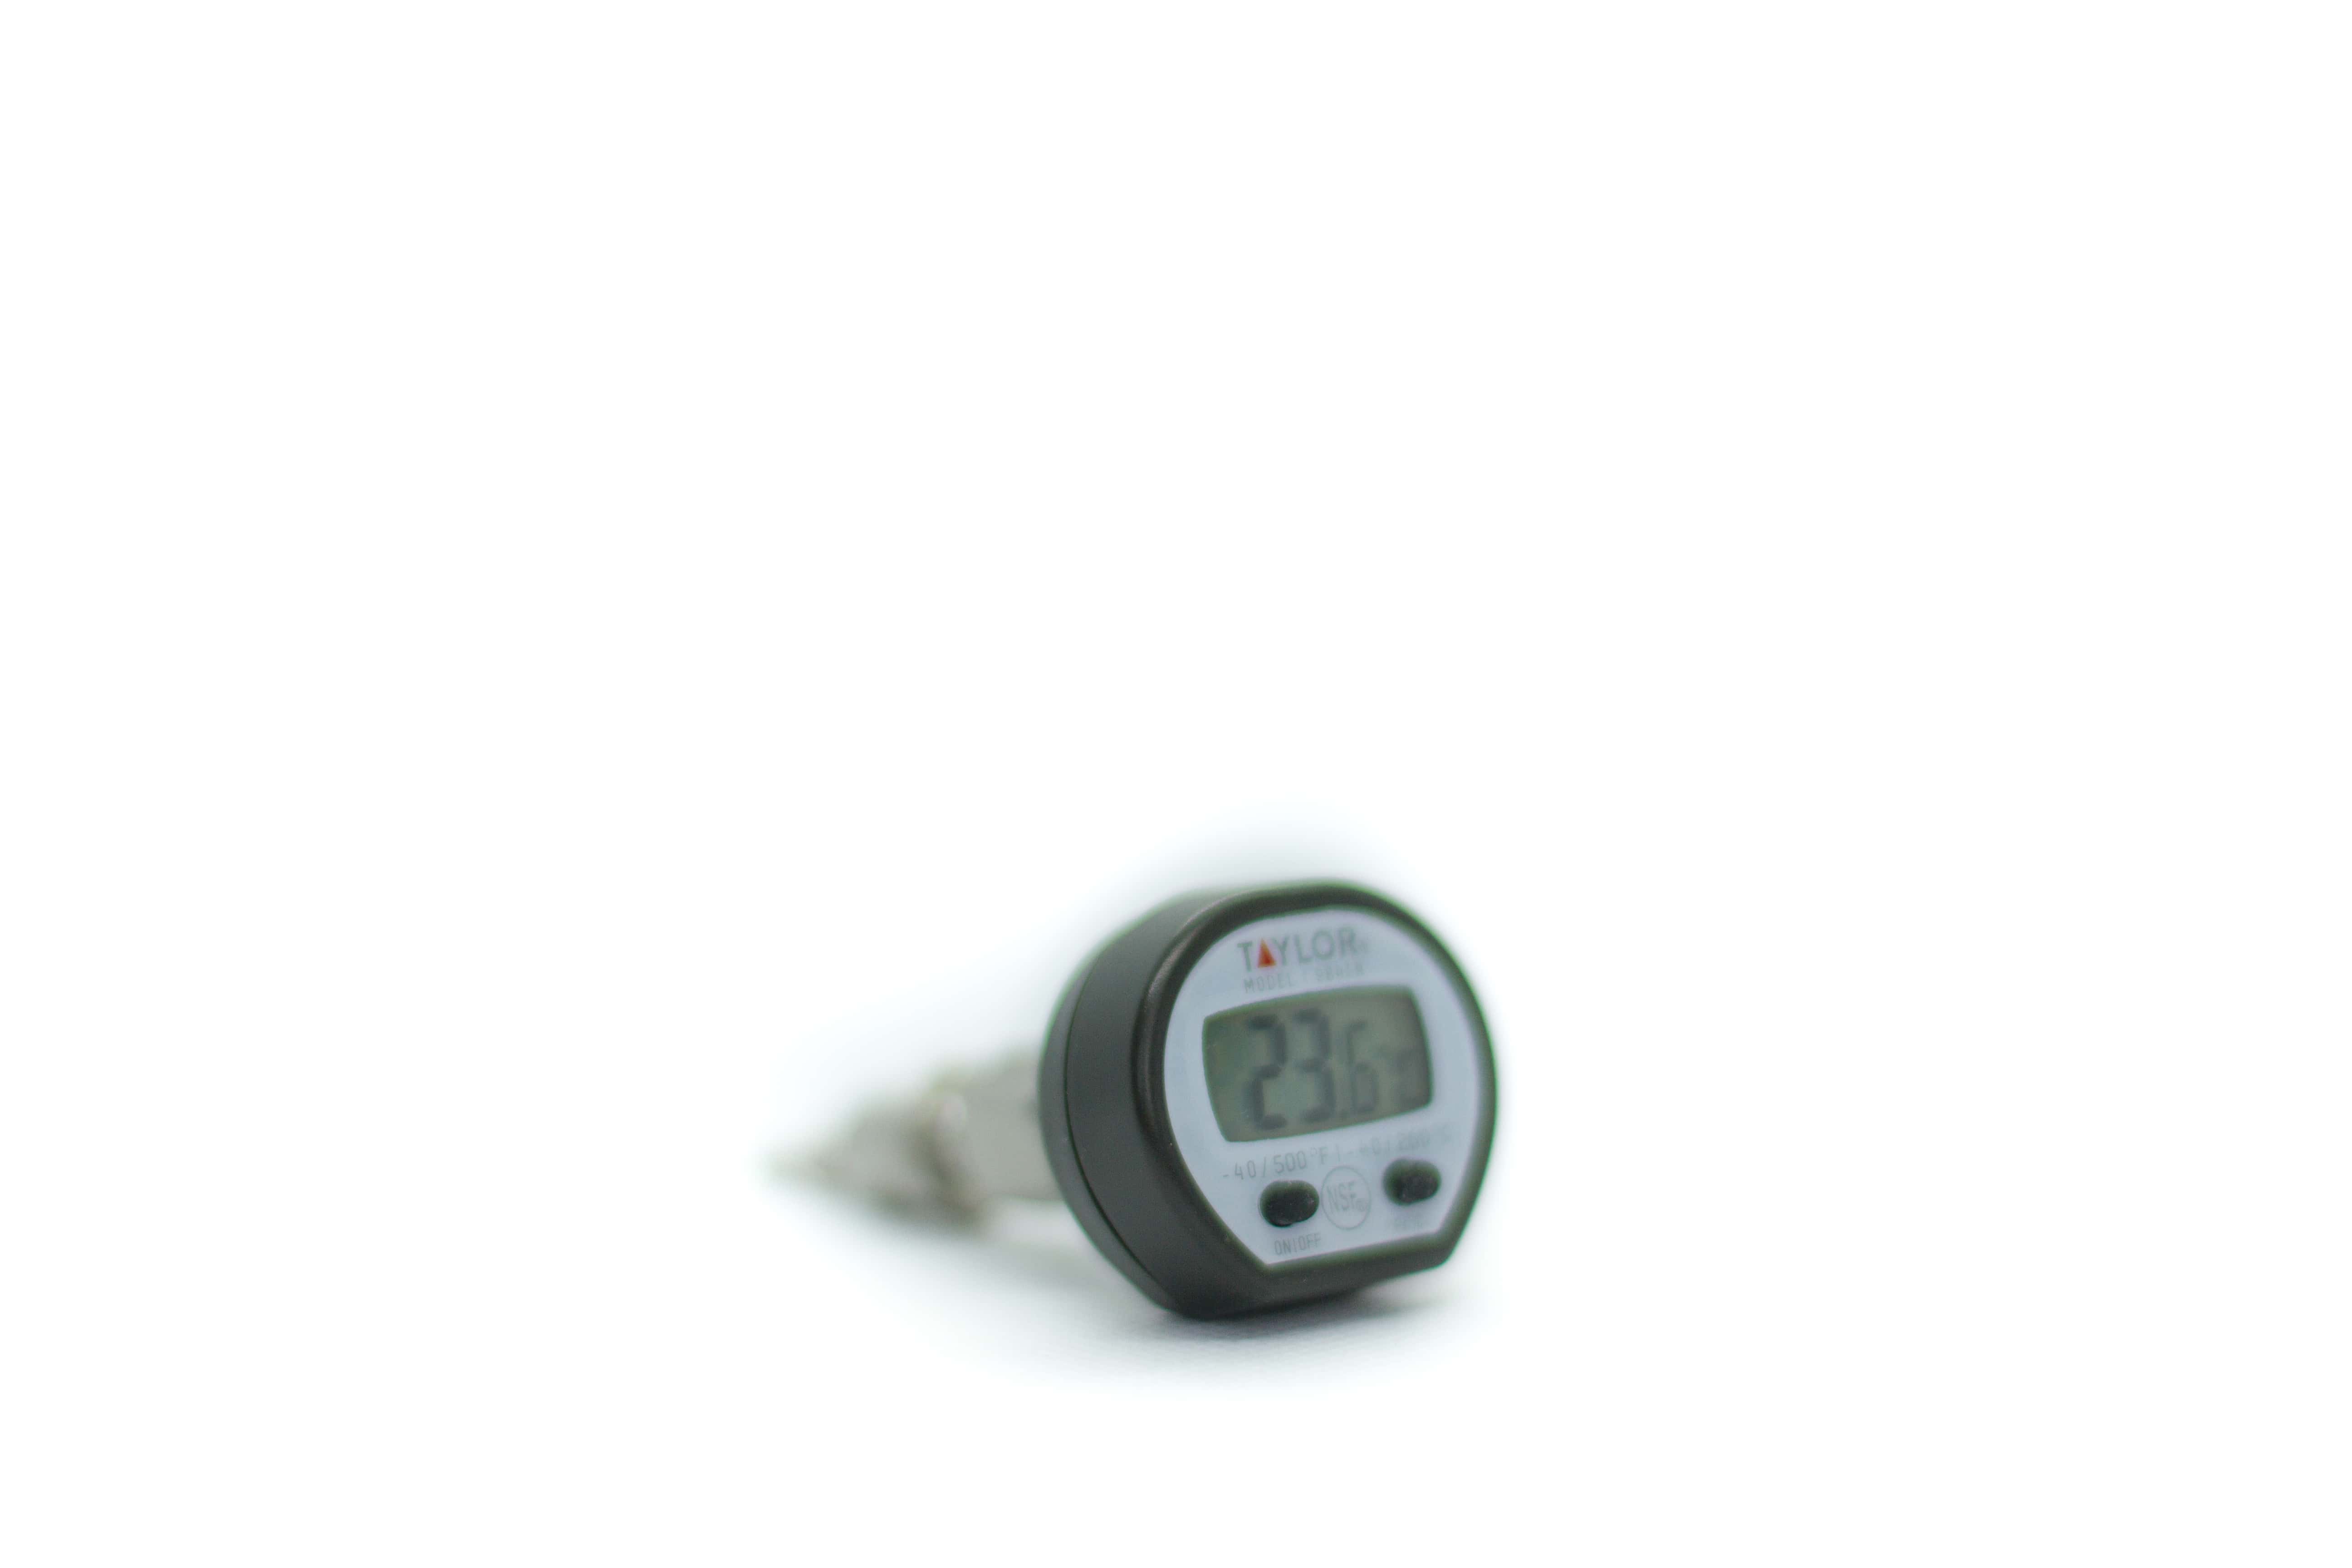 Digital Threaded Brewing Thermometer